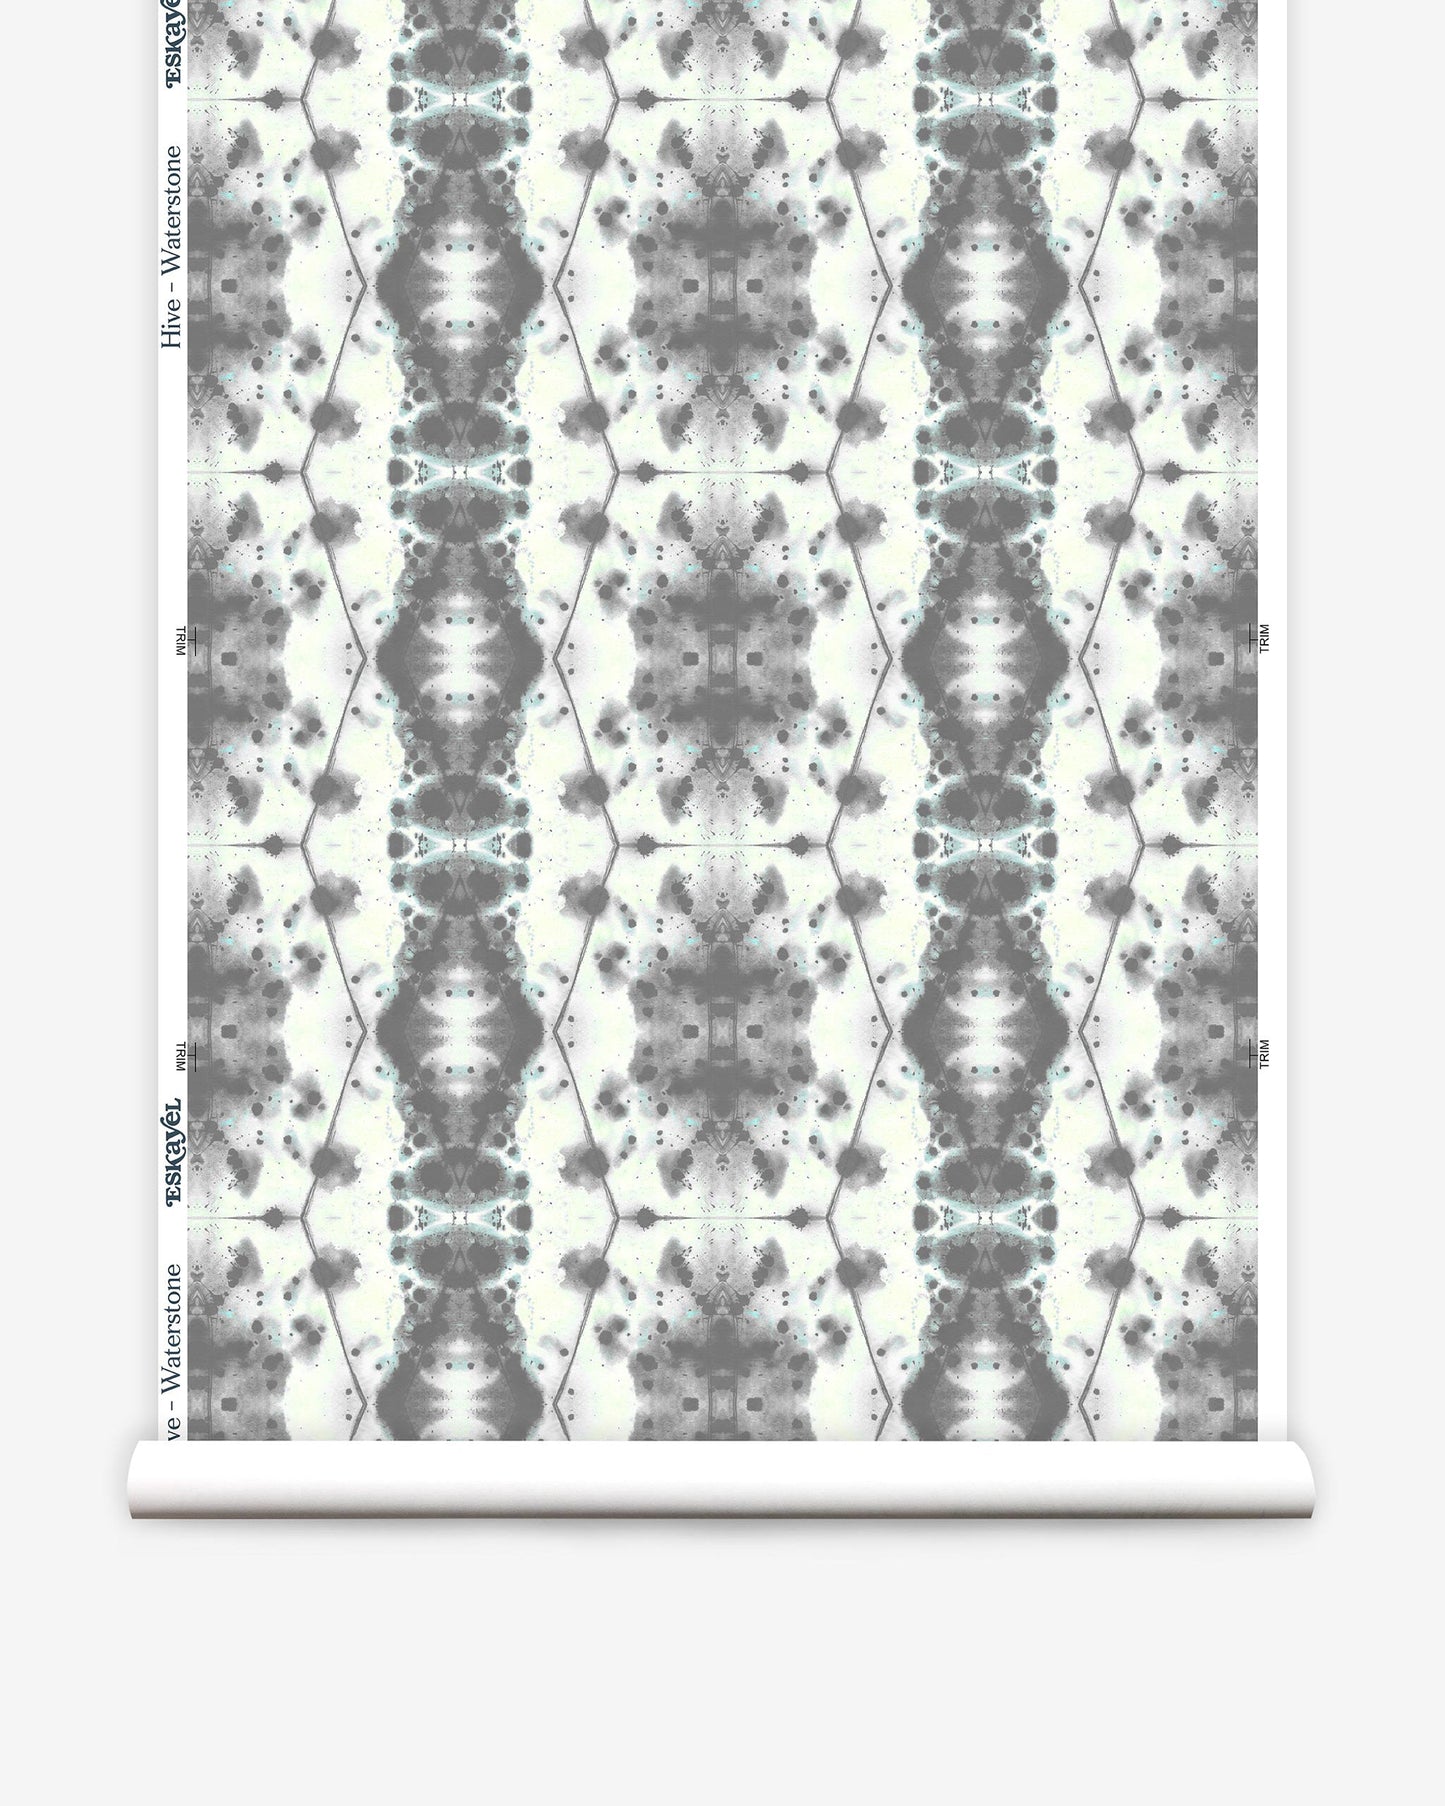 A white and gray Hive Wallpaper with a floral pattern.